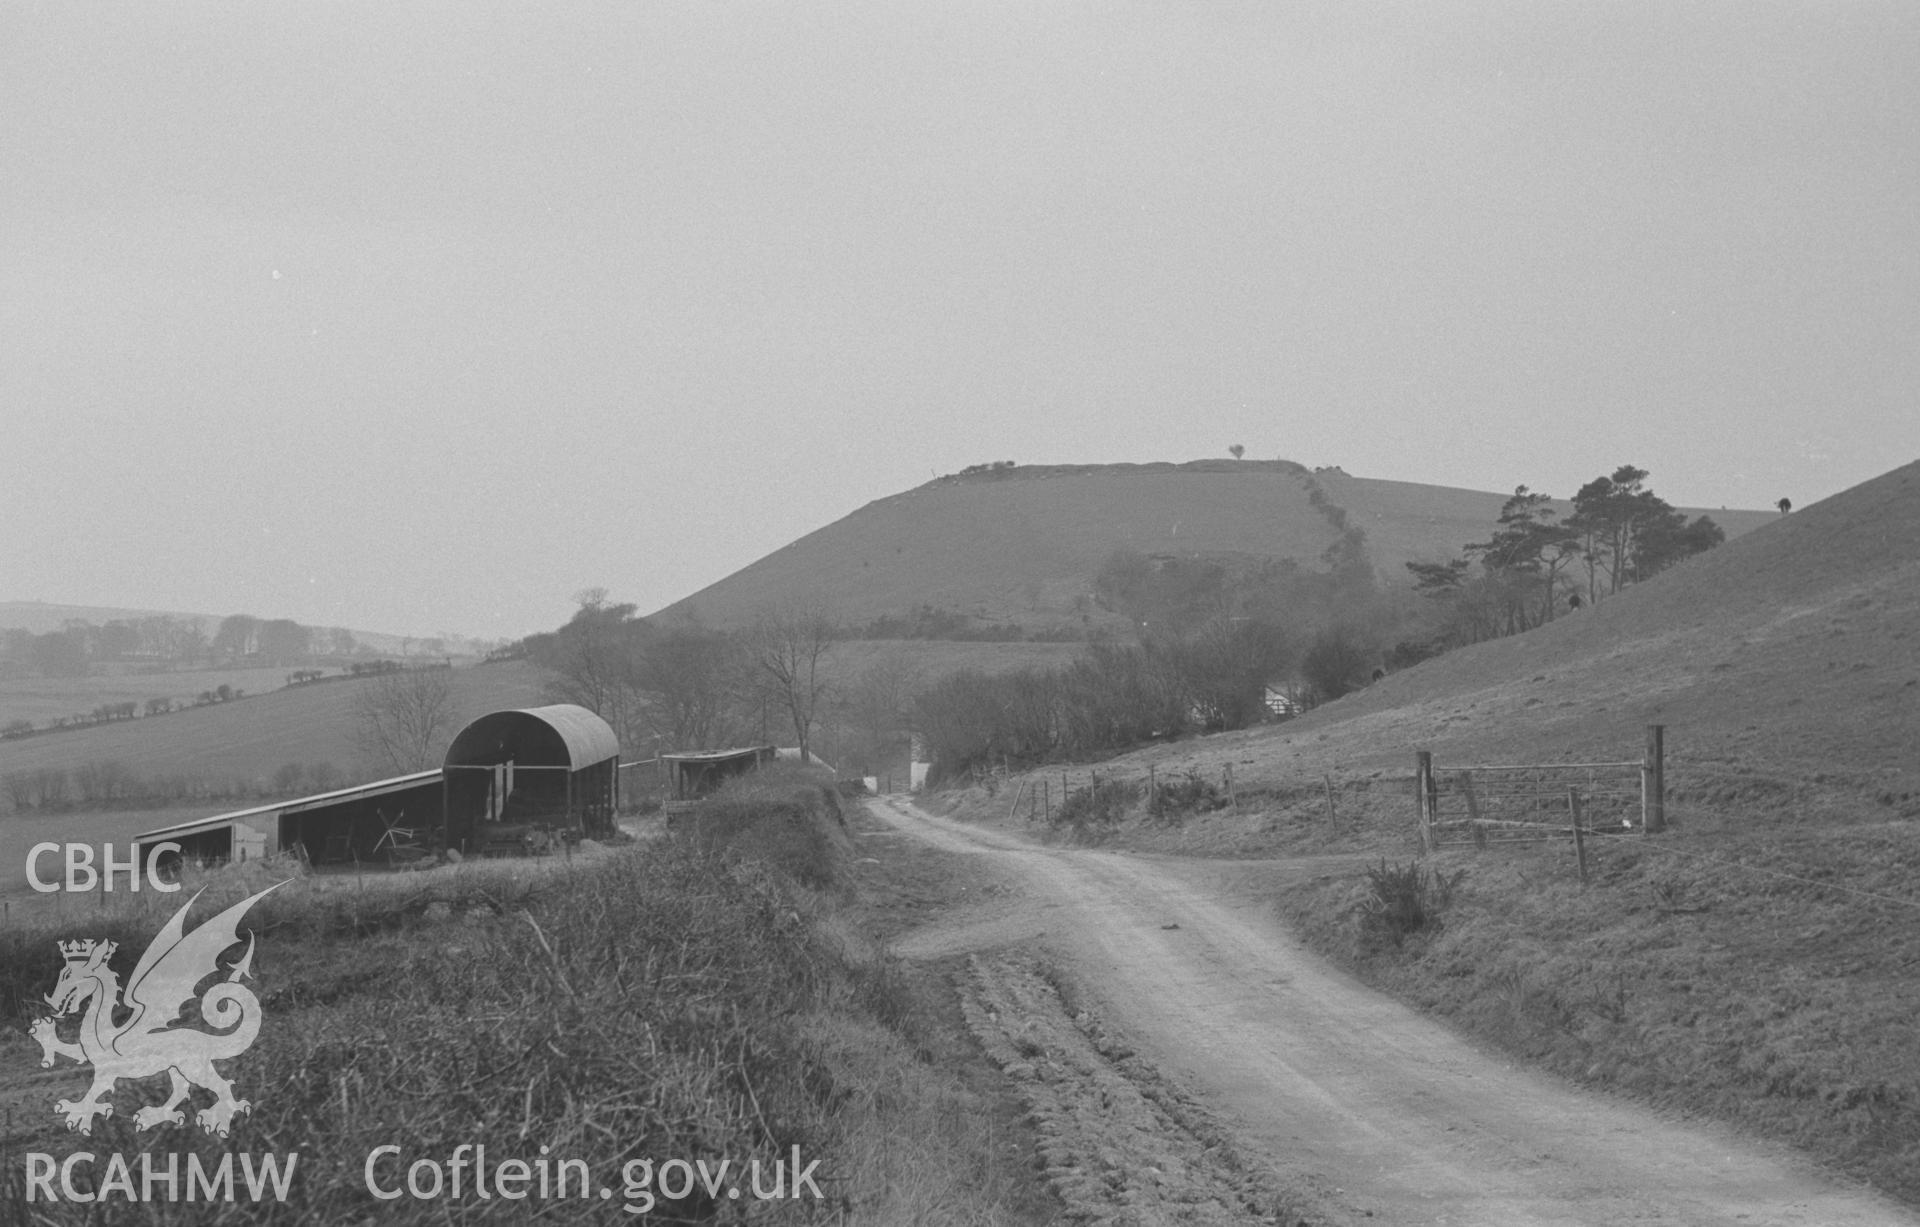 Digital copy of a black and white negative showing Castell Moeddyn fawr, south east of New Quay. Photographed in April 1964 by Arthur O. Chater from the lane 200m east of Moeddyn-Fawr farm at Grid Reference SN 4900 5205, looking west south west.